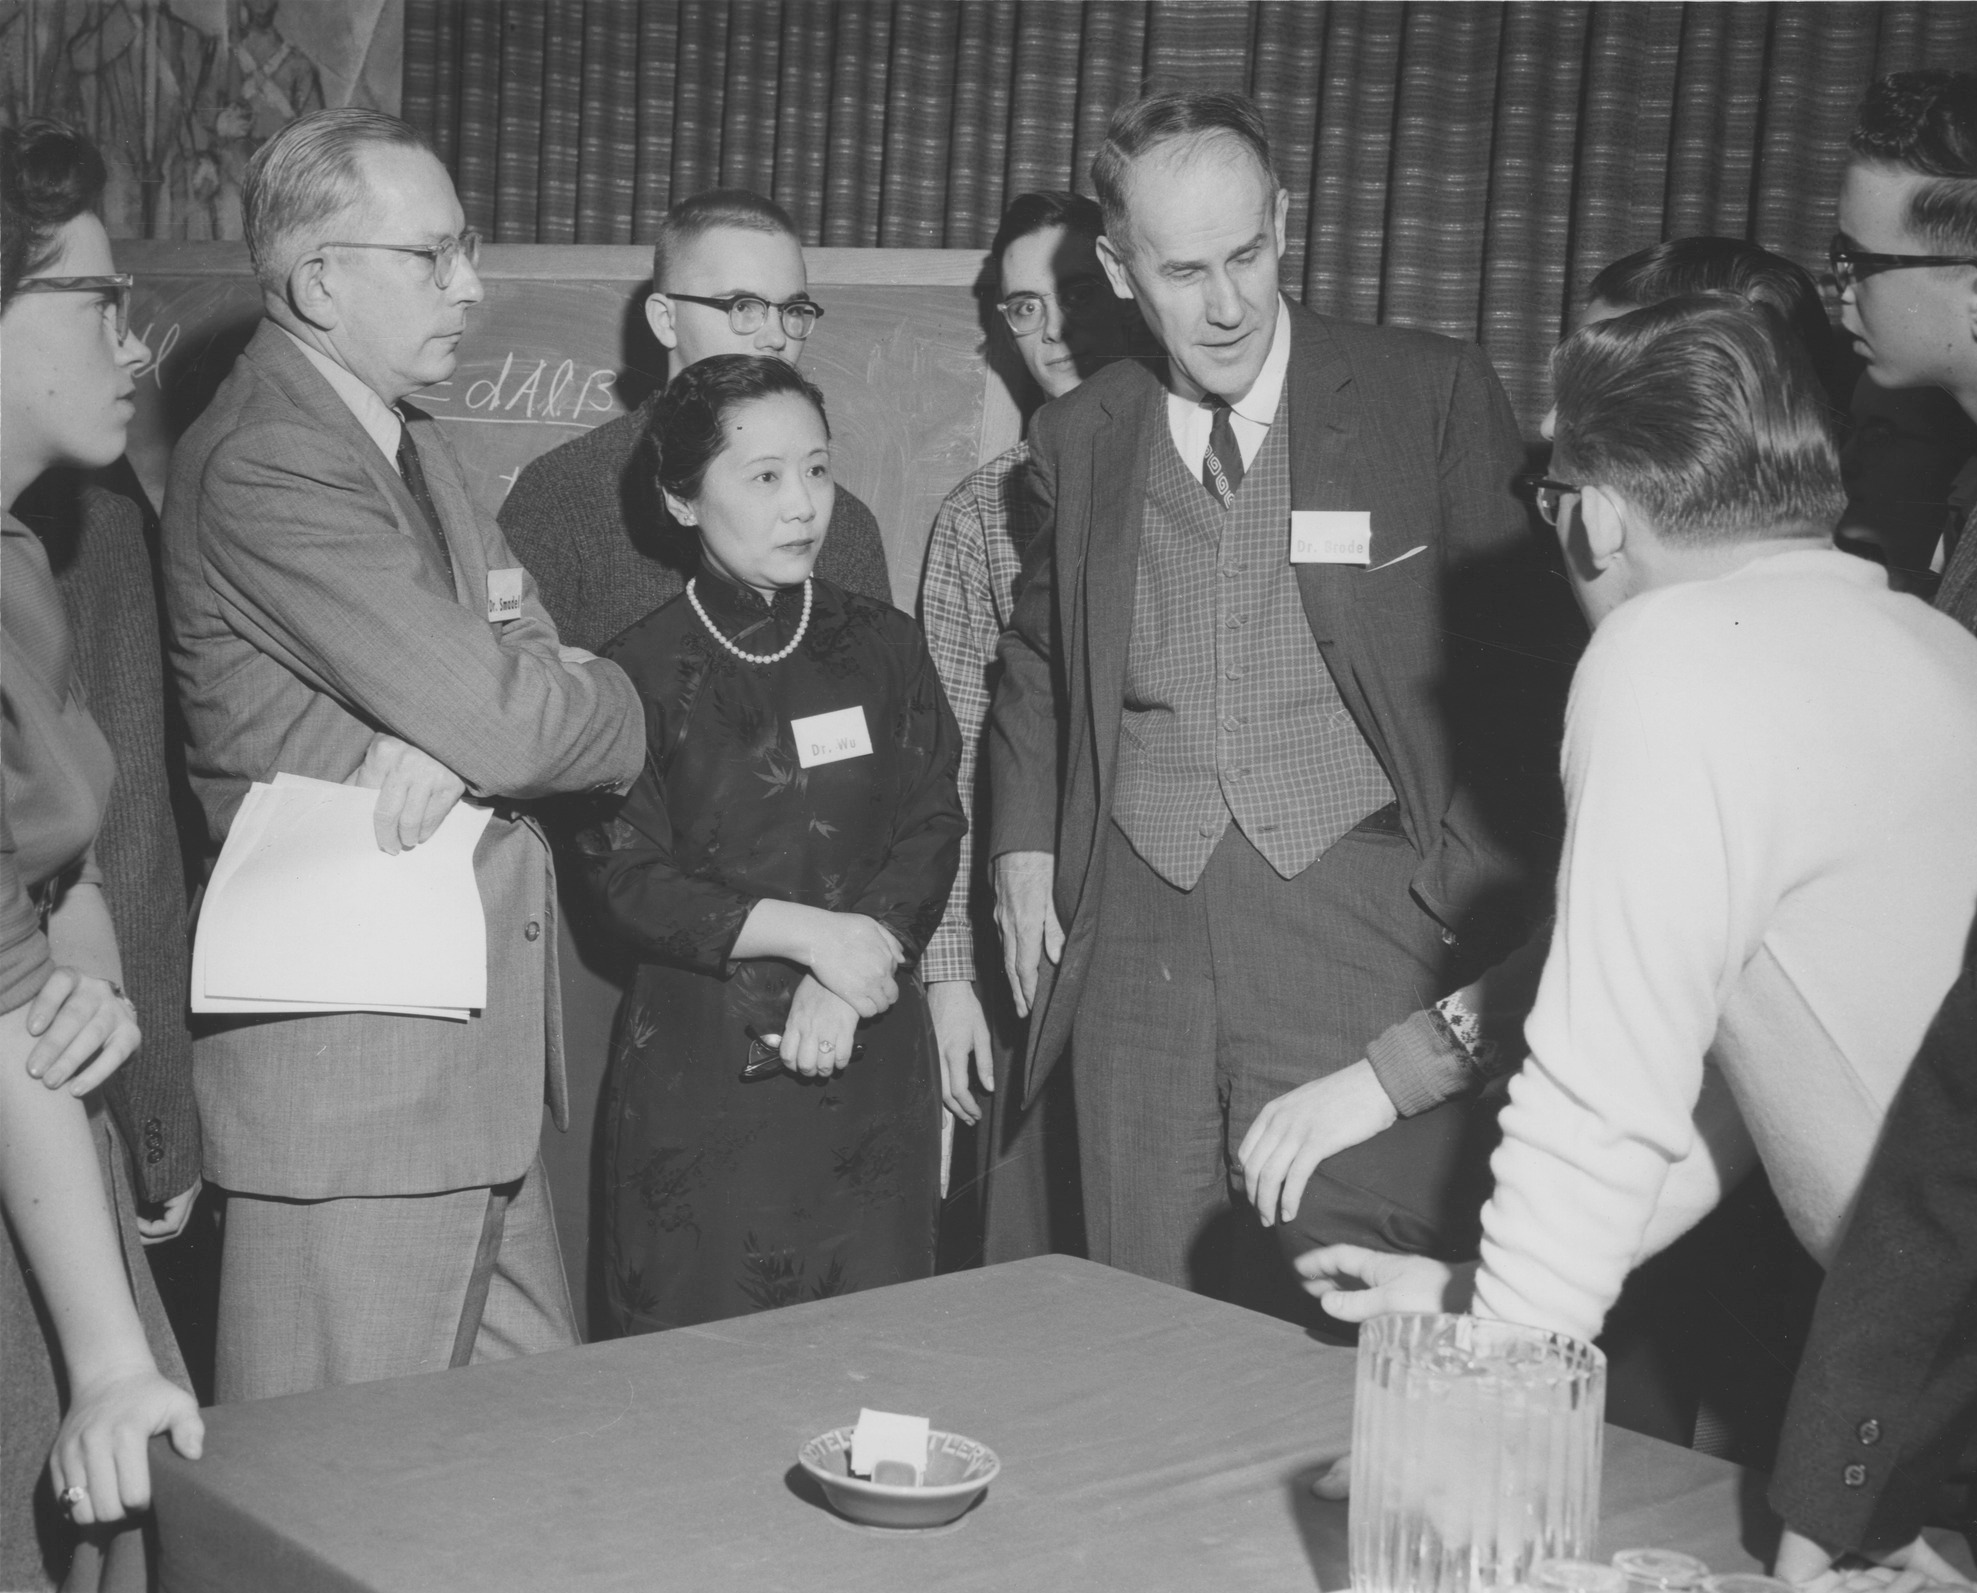 Professors Wu Chien-Shiung and Wallace Brode with Science Talent Search winners, Columbia University, New York, New York, United States, 15 Mar 1958, photo 1 of 2